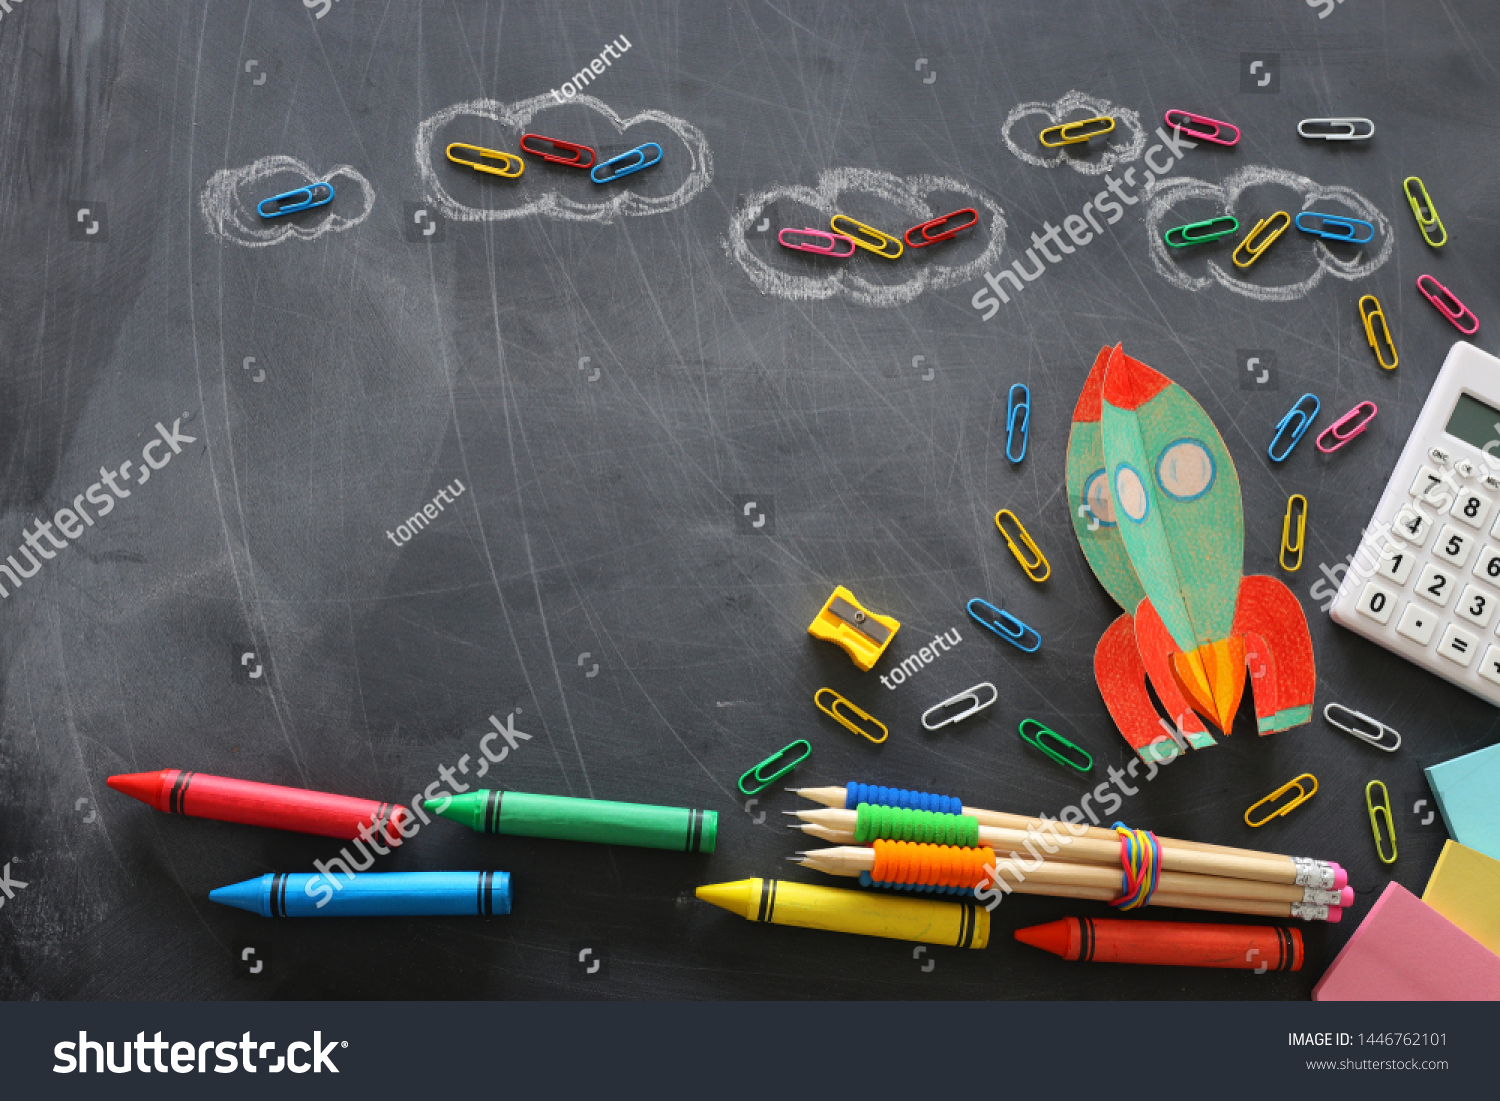 education. Back to school concept. rocket cut from paper and painted over blackboard background. top view, flat lay #1446762101